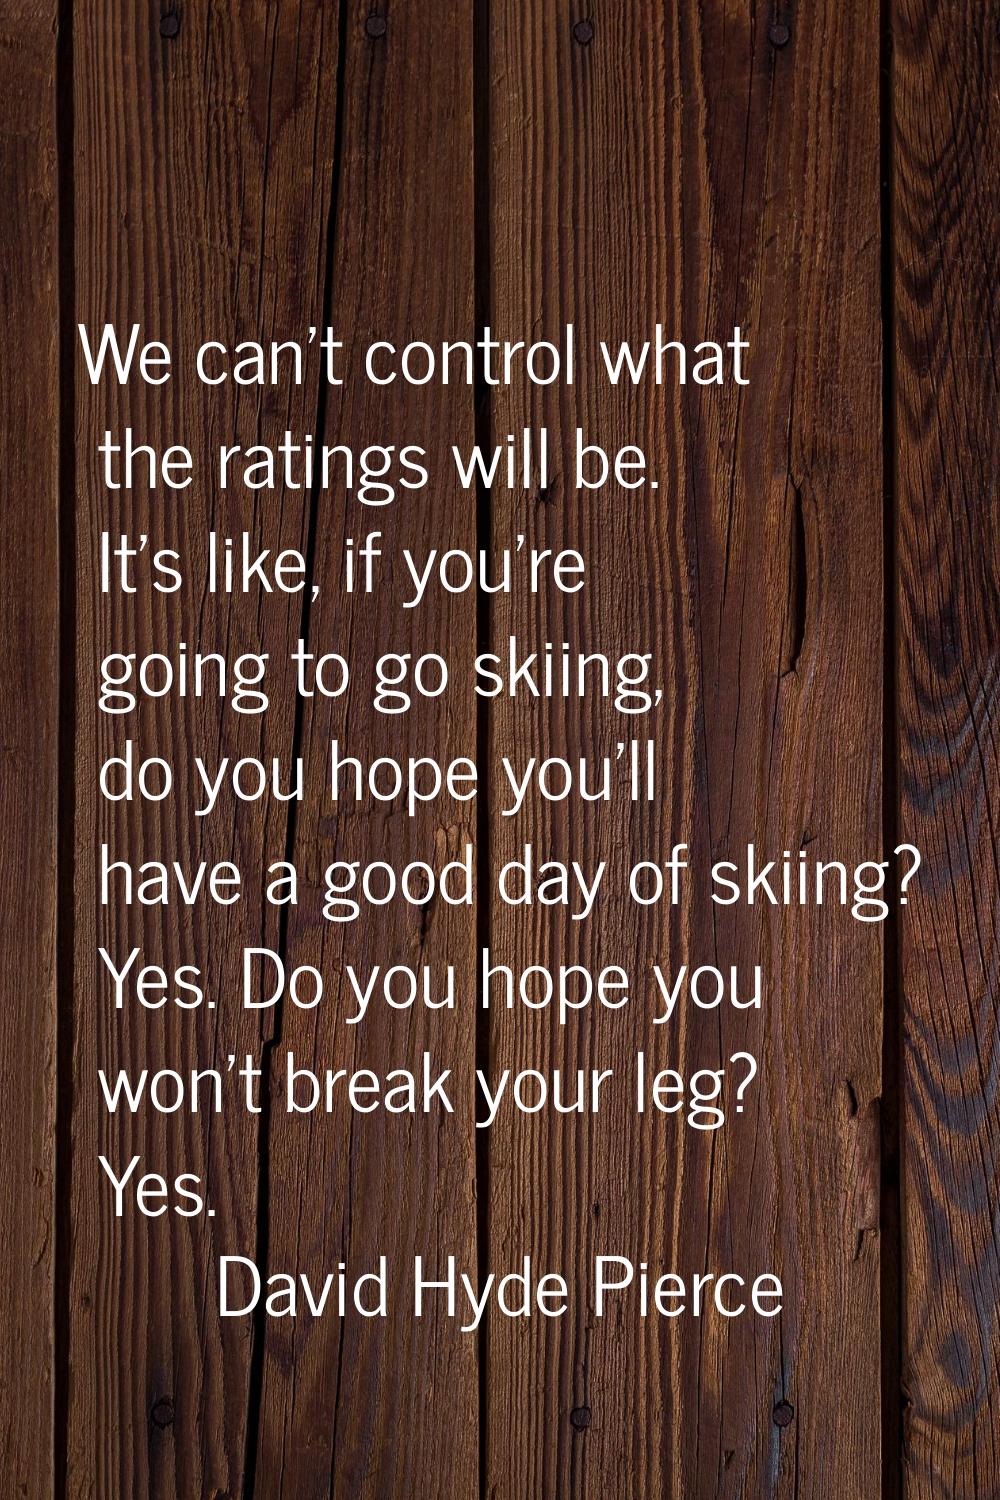 We can't control what the ratings will be. It's like, if you're going to go skiing, do you hope you